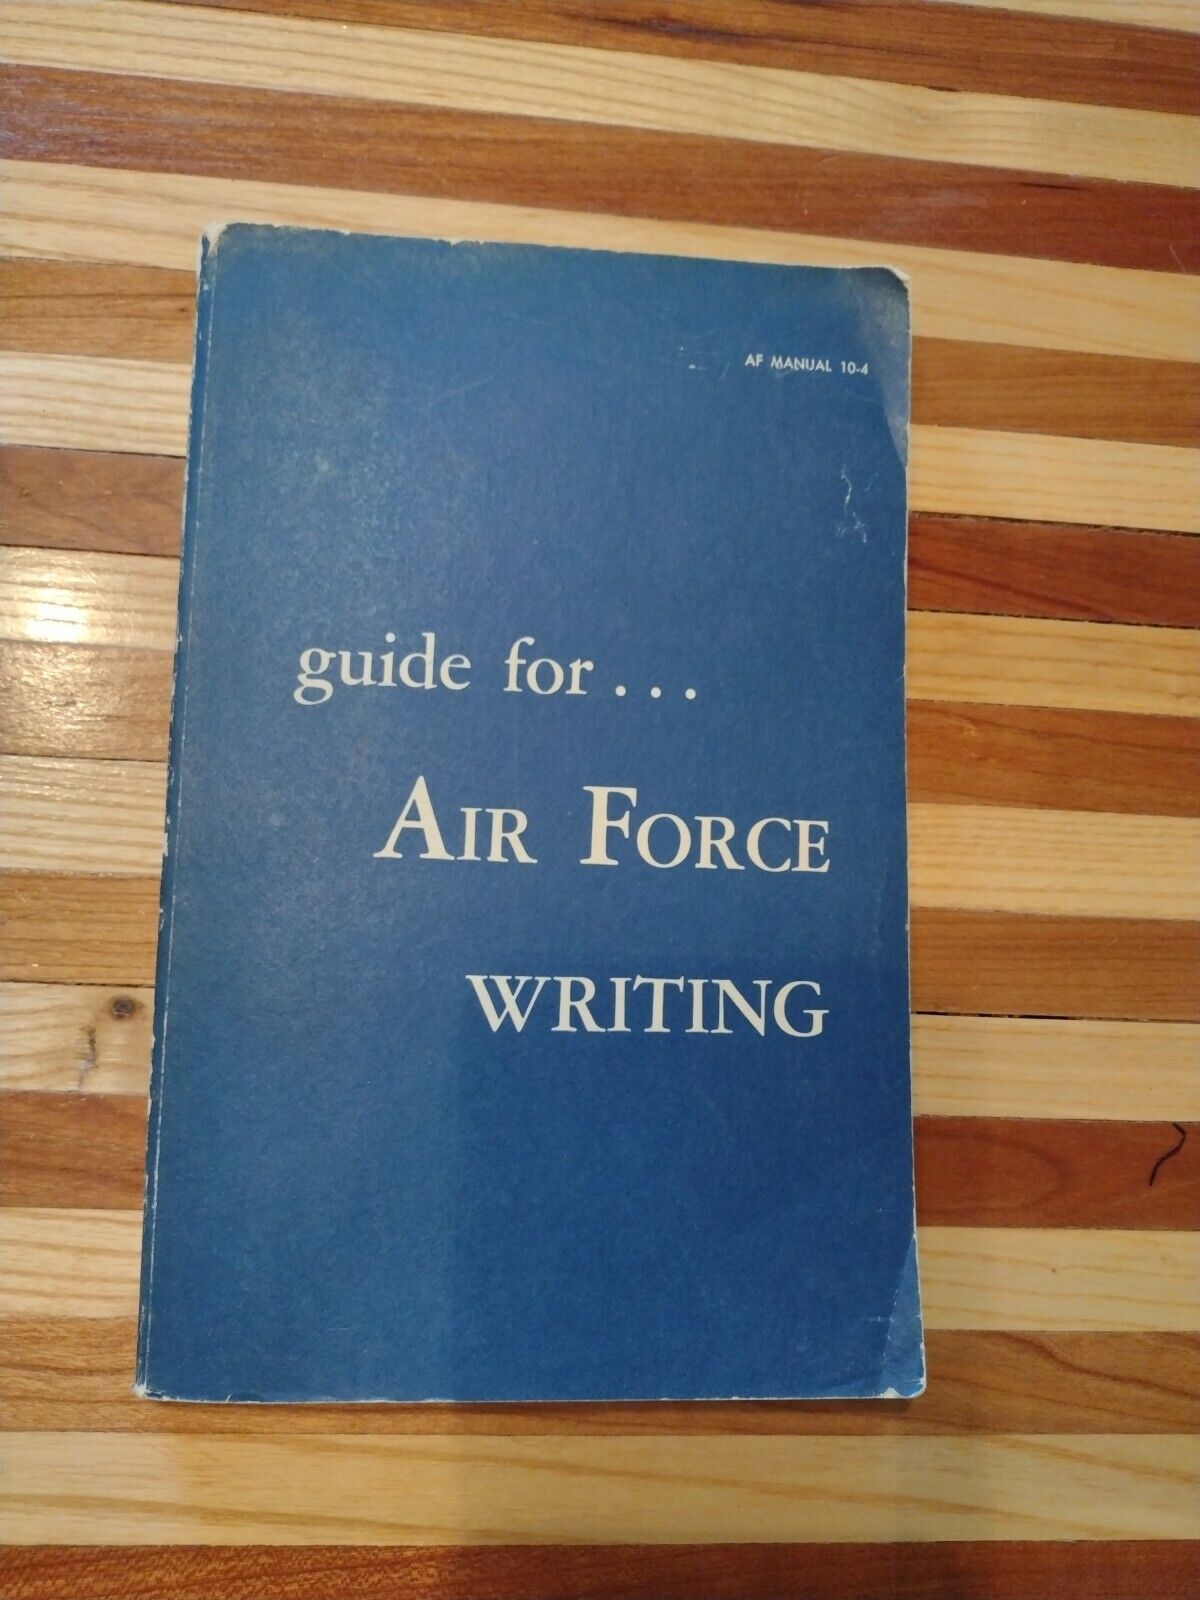 Vintage GUIDE FOR AIR FORCE WRITING AF Manual 10-4 1960